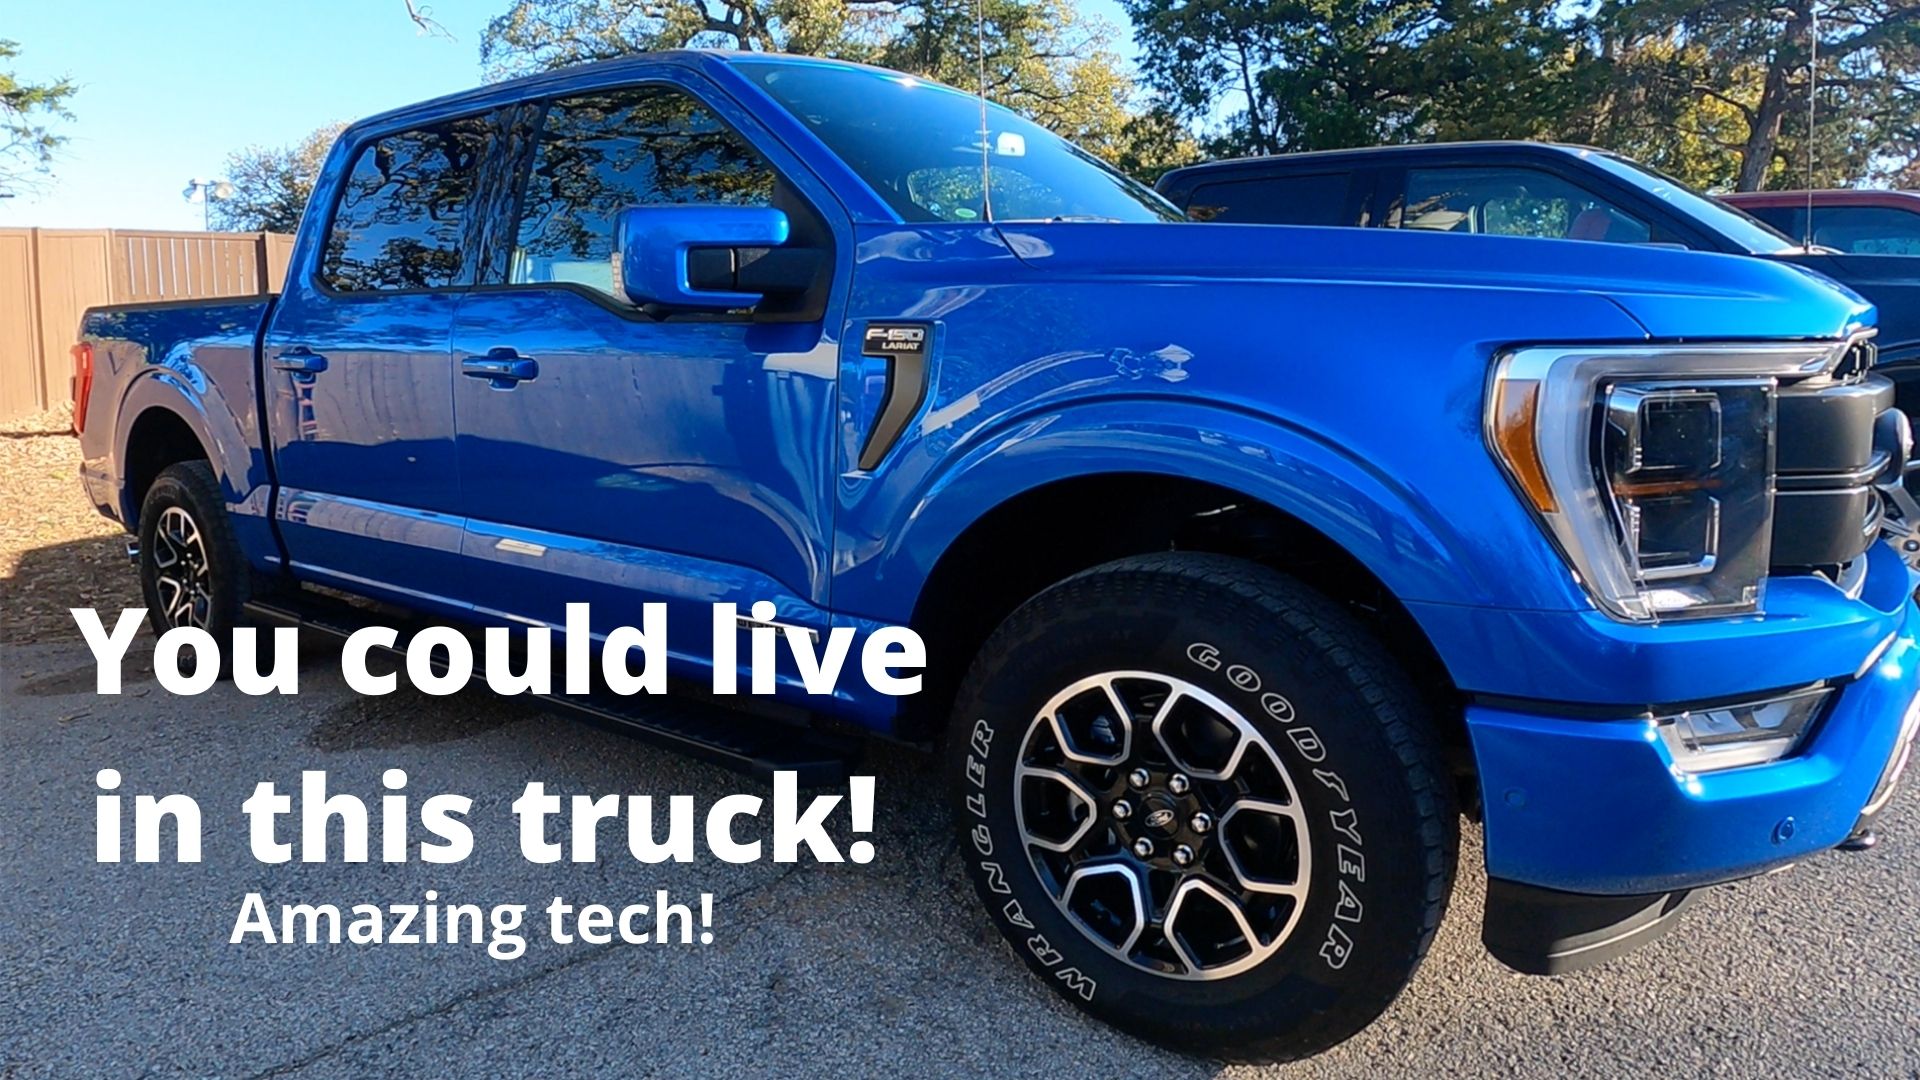 2021 Ford F150 walkaround and coolest features